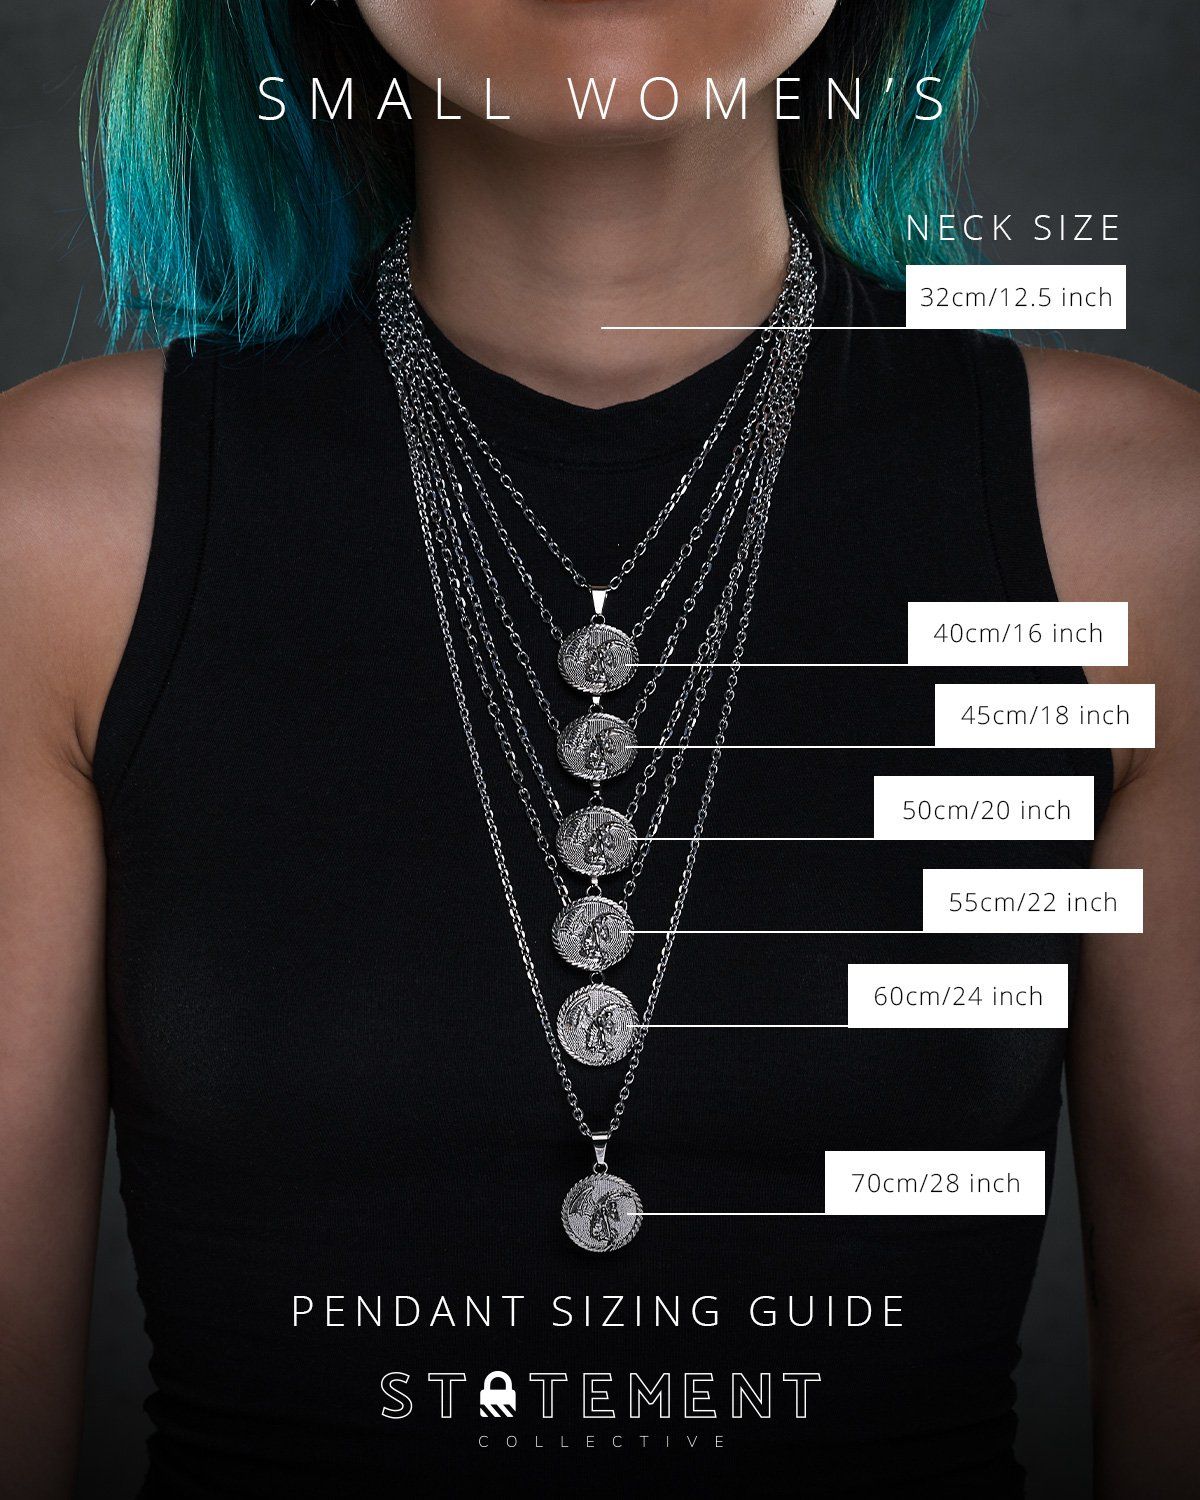 Womens small neck size guide for necklaces